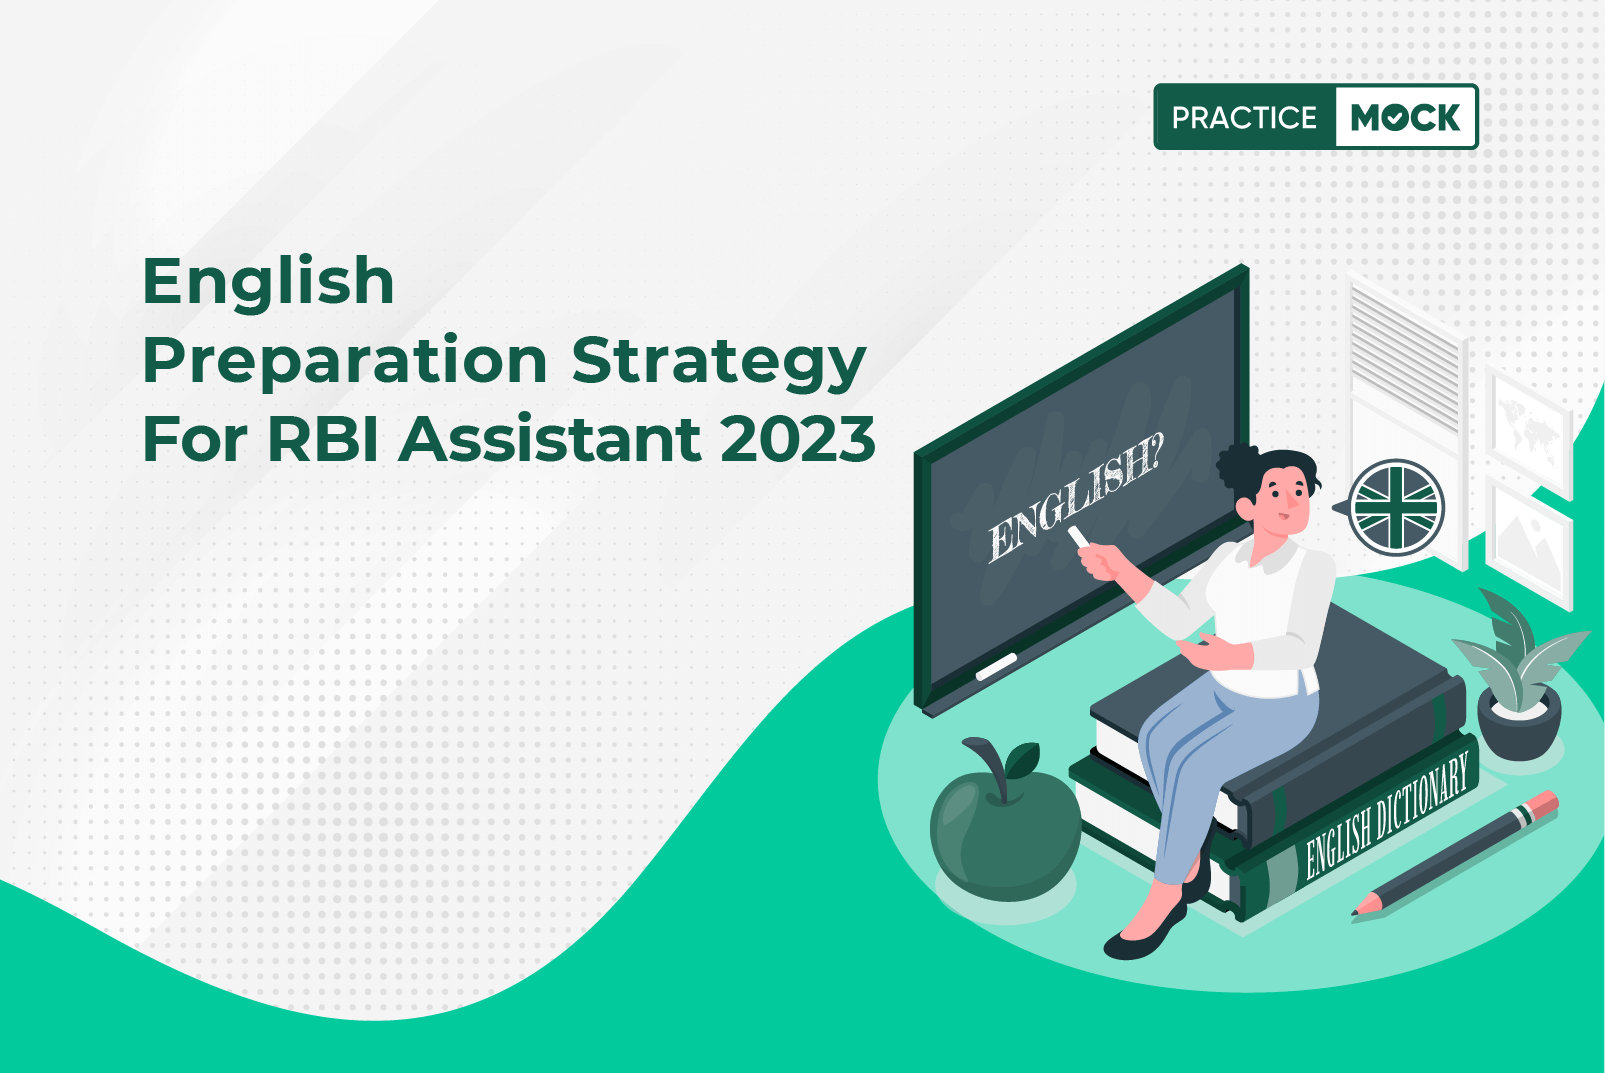 English Preparation Strategy for RBI Assistant